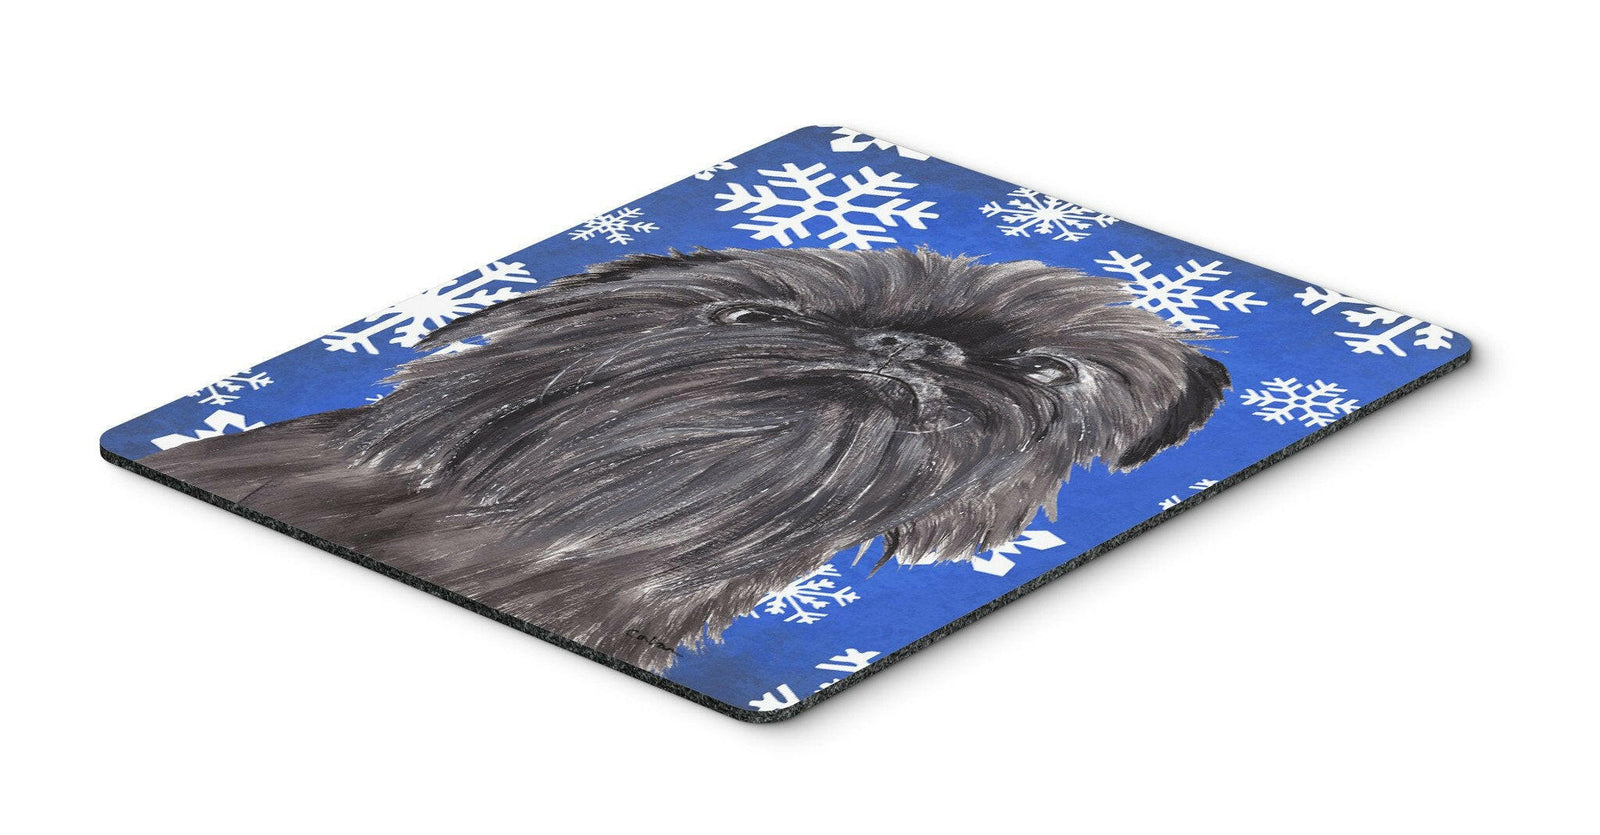 Brussels Griffon Blue Snowflake Winter Mouse Pad, Hot Pad or Trivet by Caroline's Treasures